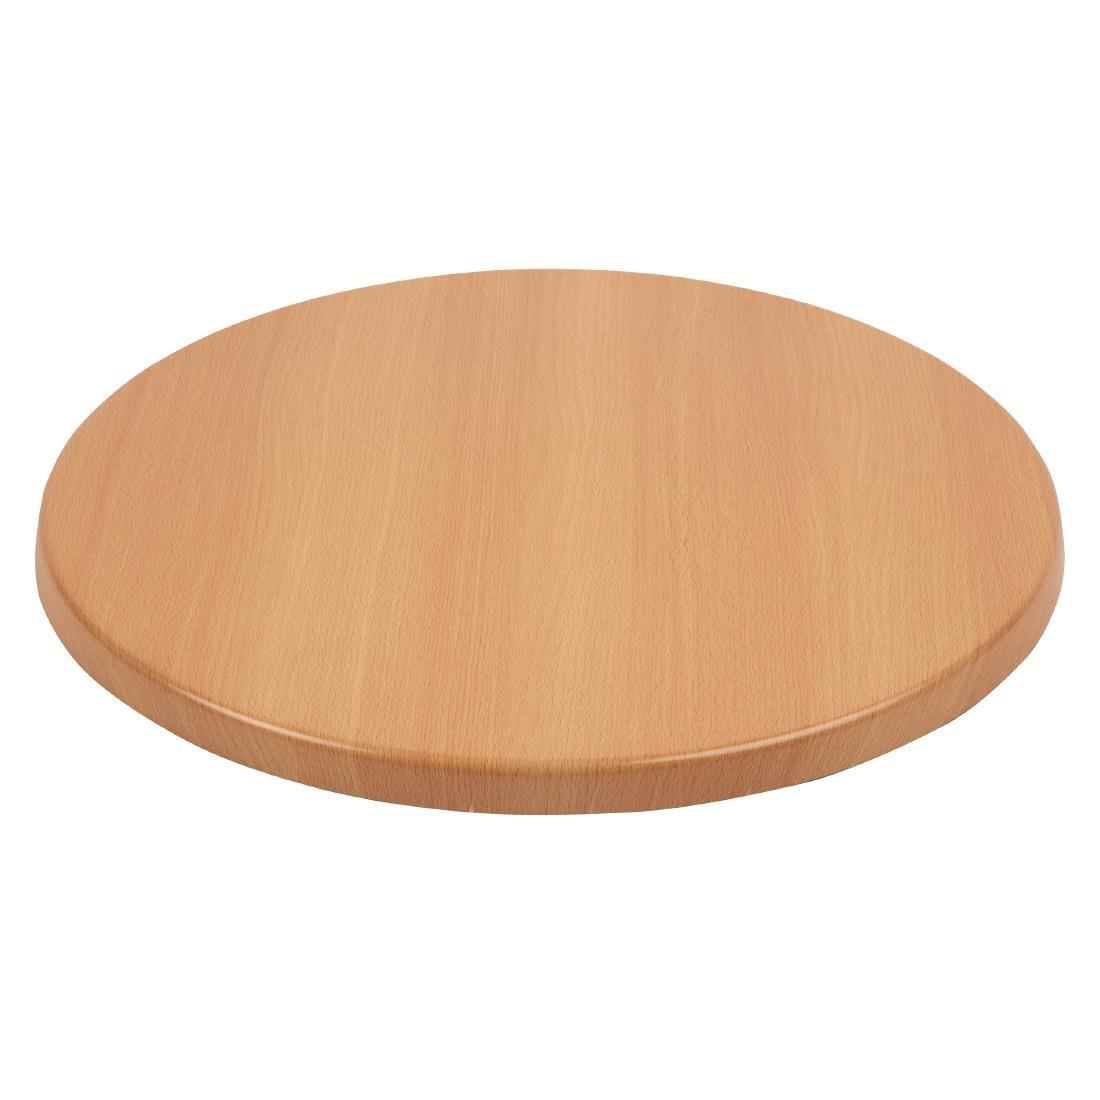 Bolero Pre-drilled Round Table Top Beech Effect 800mm - GL975  - 2